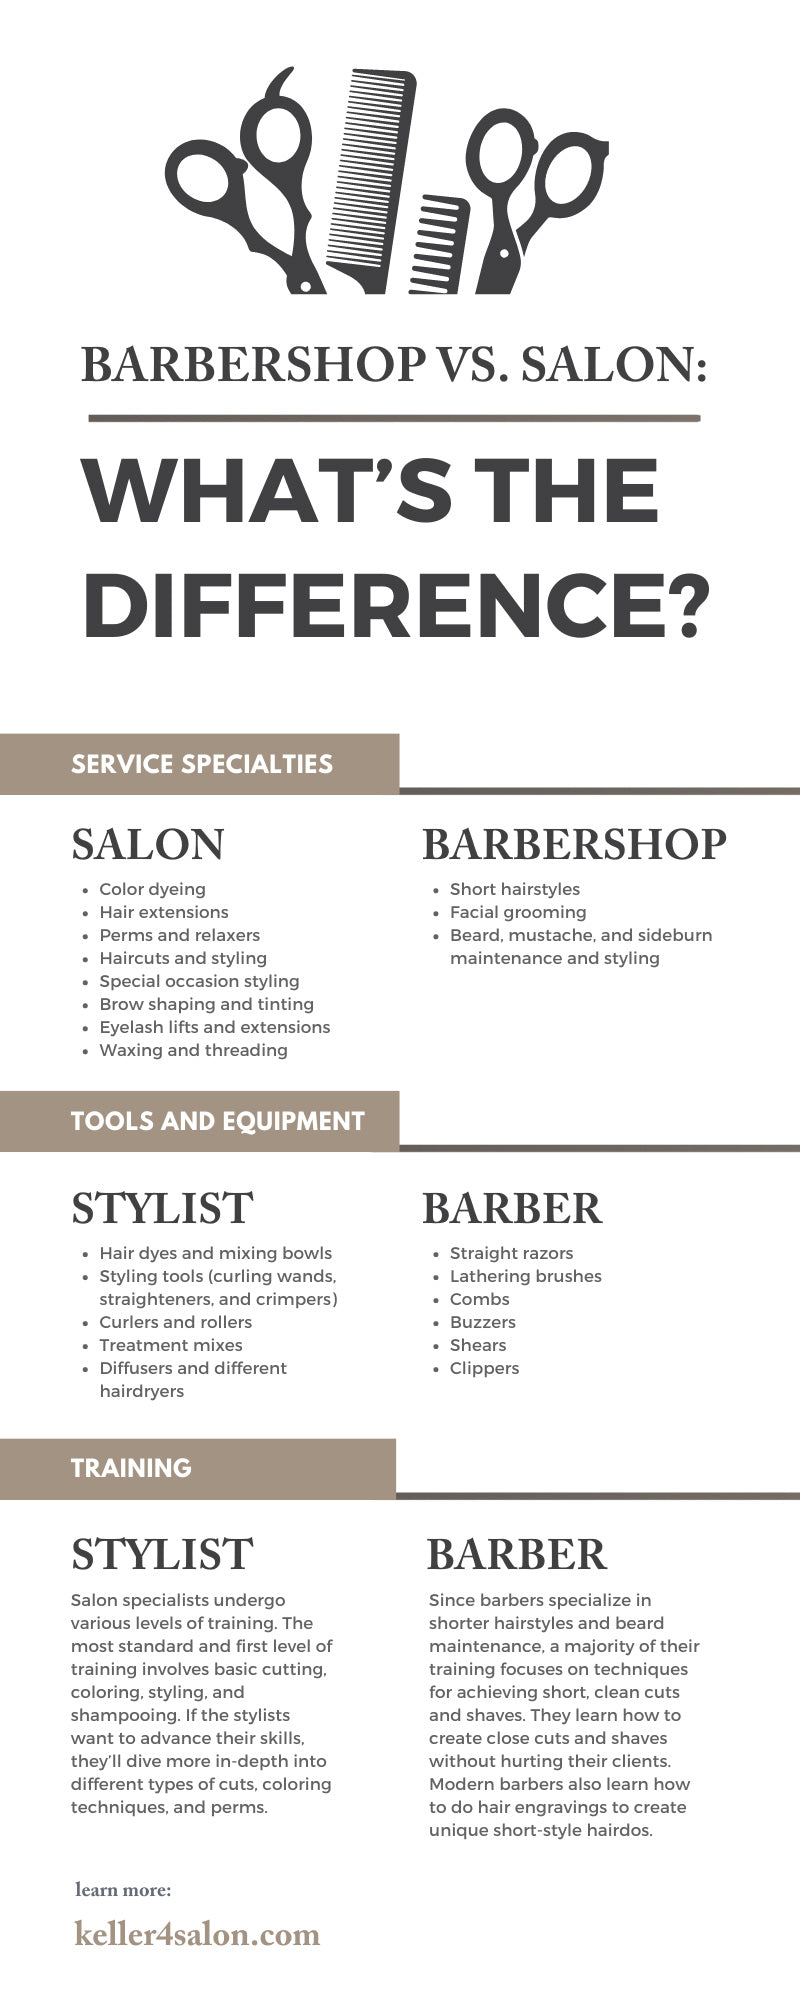 Barbershop vs. Salon: What’s the Difference?